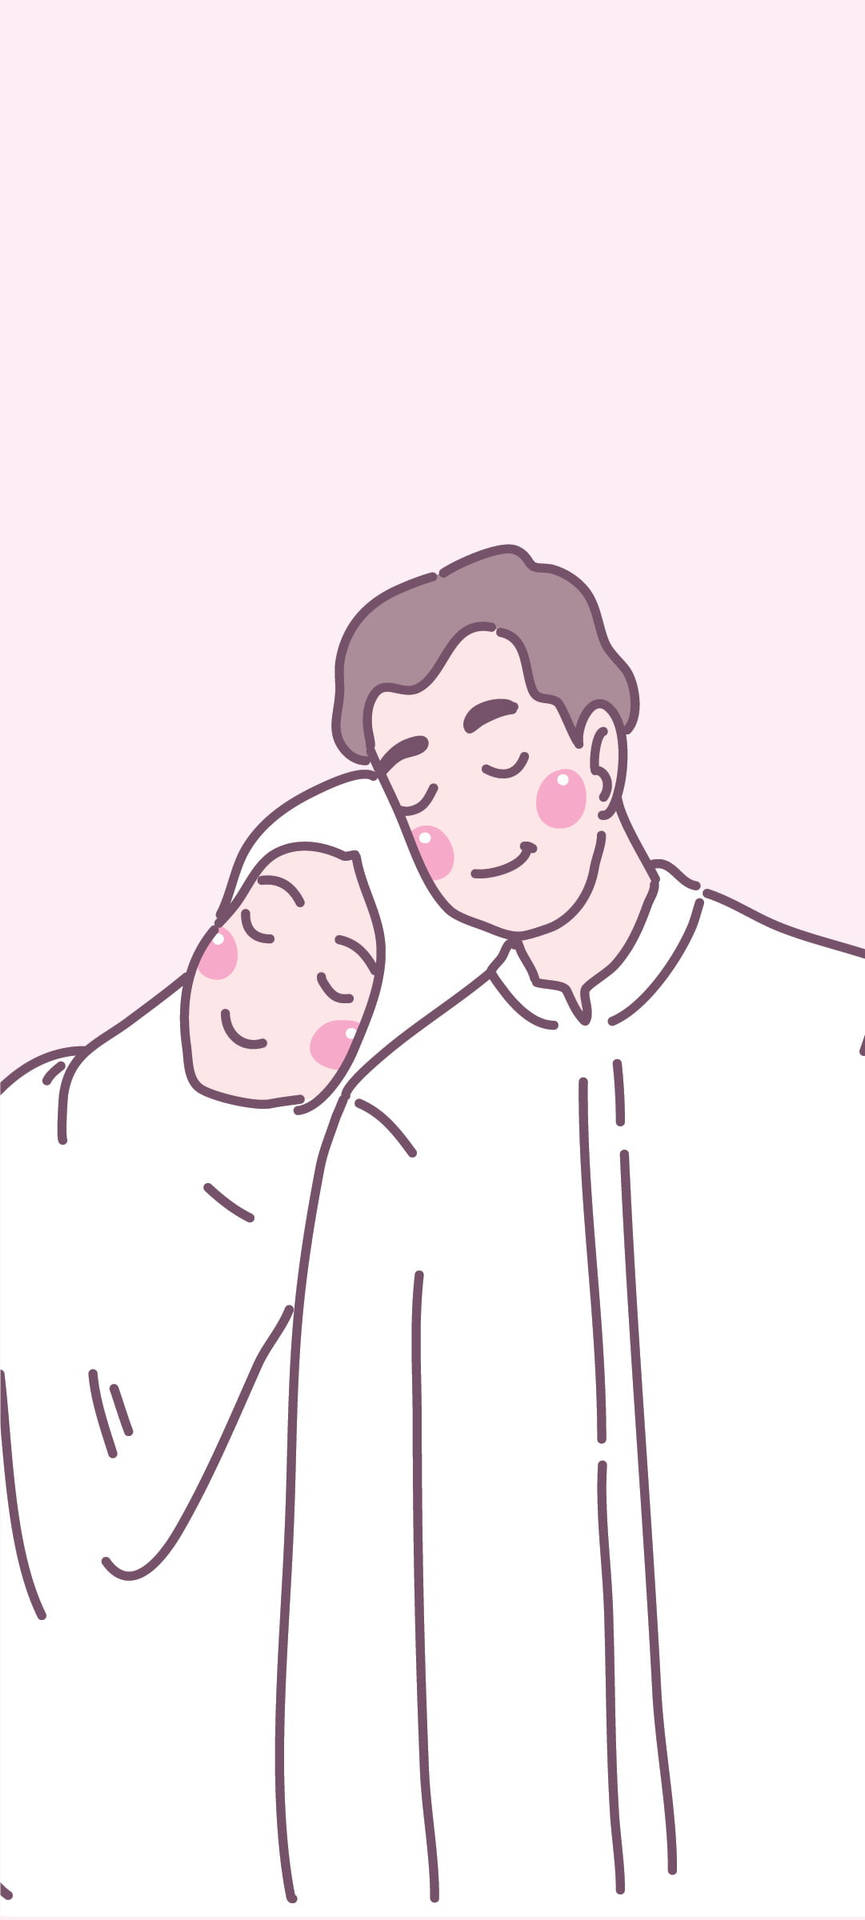 Download Muslim Couple Cartoon Pink And White Aesthetic Wallpaper |  